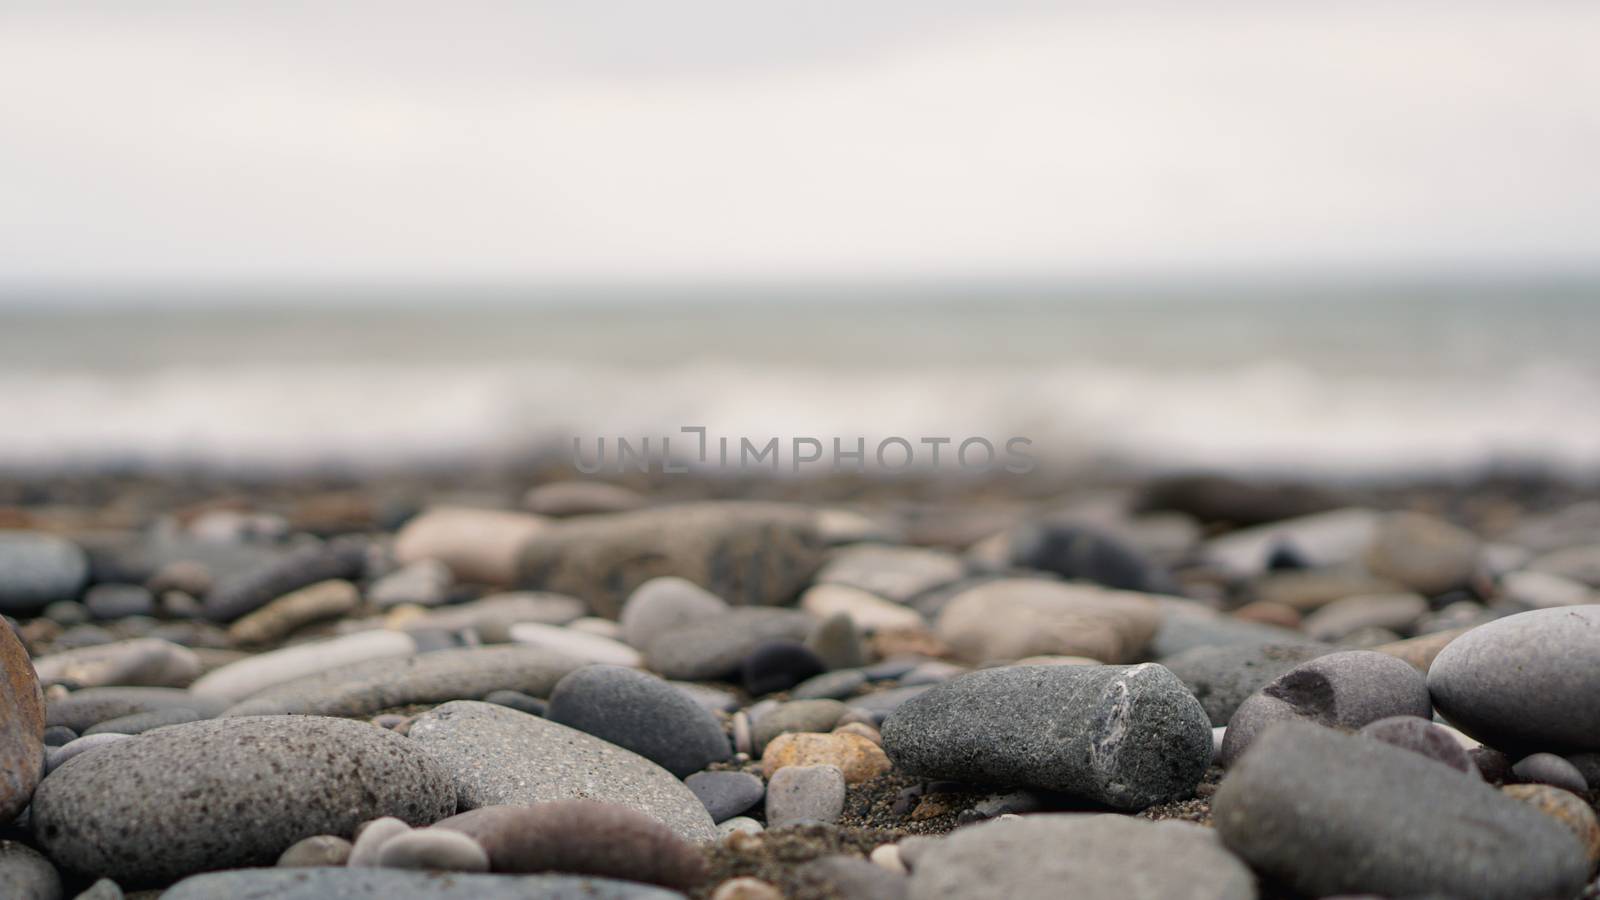 Pebble stones on the shore close up in the blurry light in the distance background.